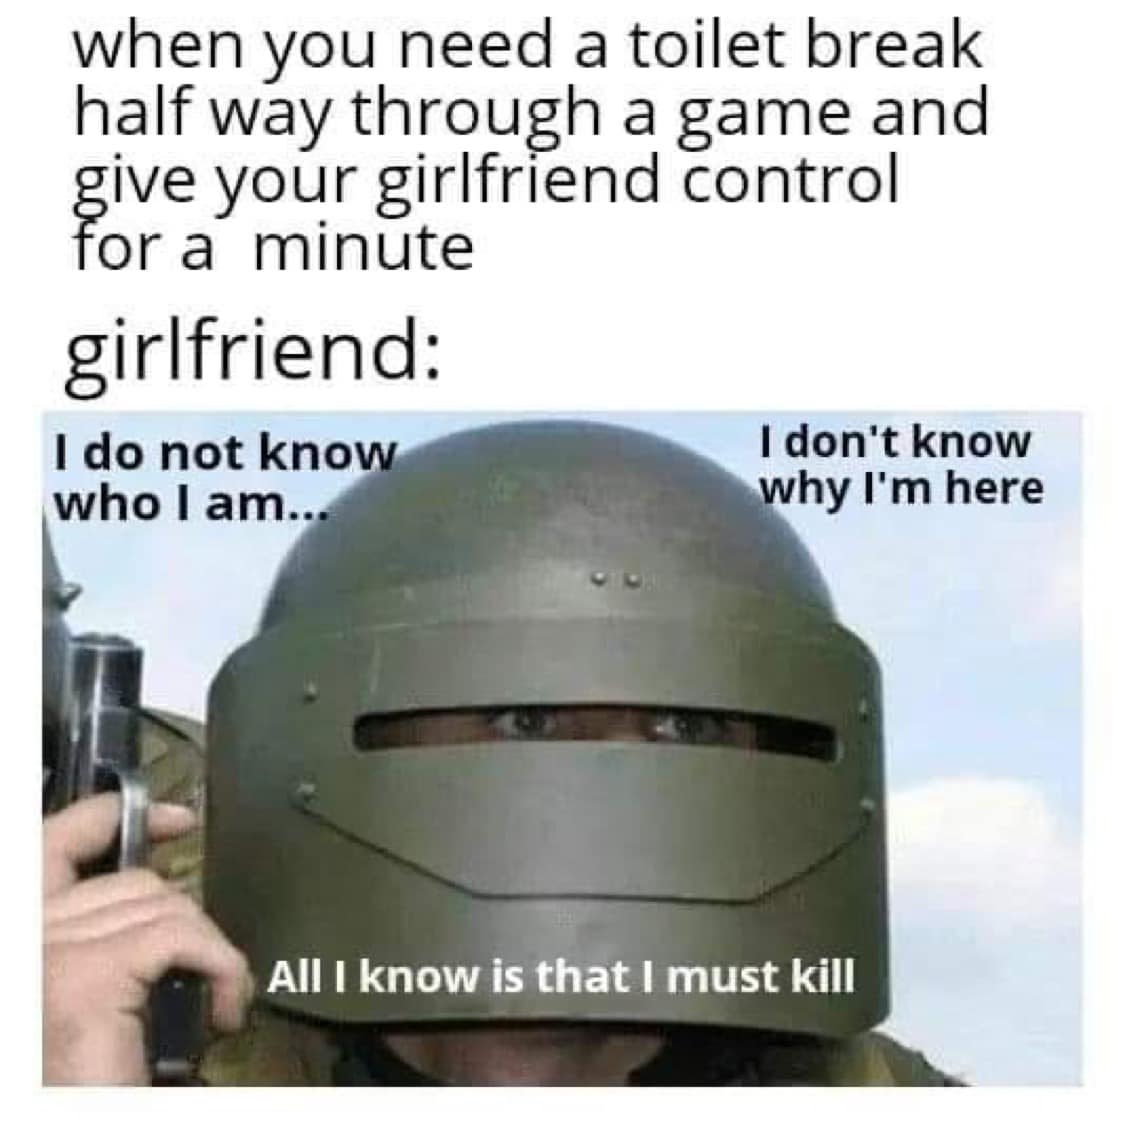 doom eternal meme - when you need a toilet break half way through a game and give your girlfriend control for a minute girlfriend I do not know who I am... why I'm here I don't know All I know is that I must kill